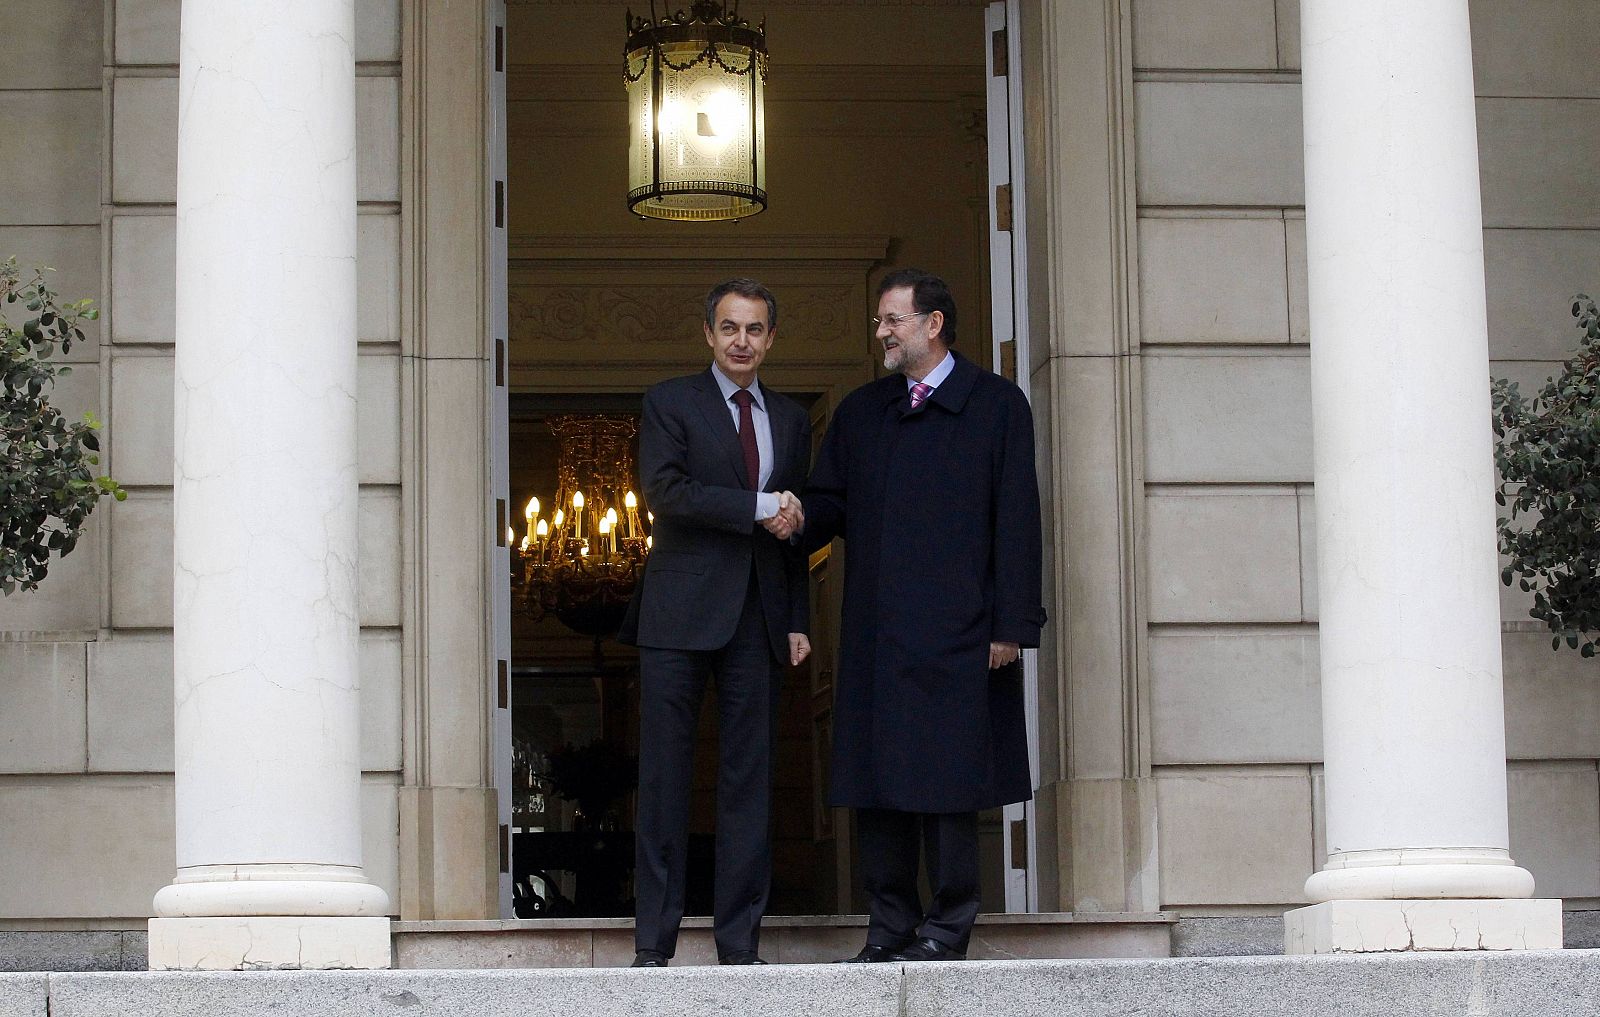 Spain's outgoing PM Jose Luis Rodriguez Zapatero shakes hands with incoming PM Mariano Rajoy during a meeting in Madrid